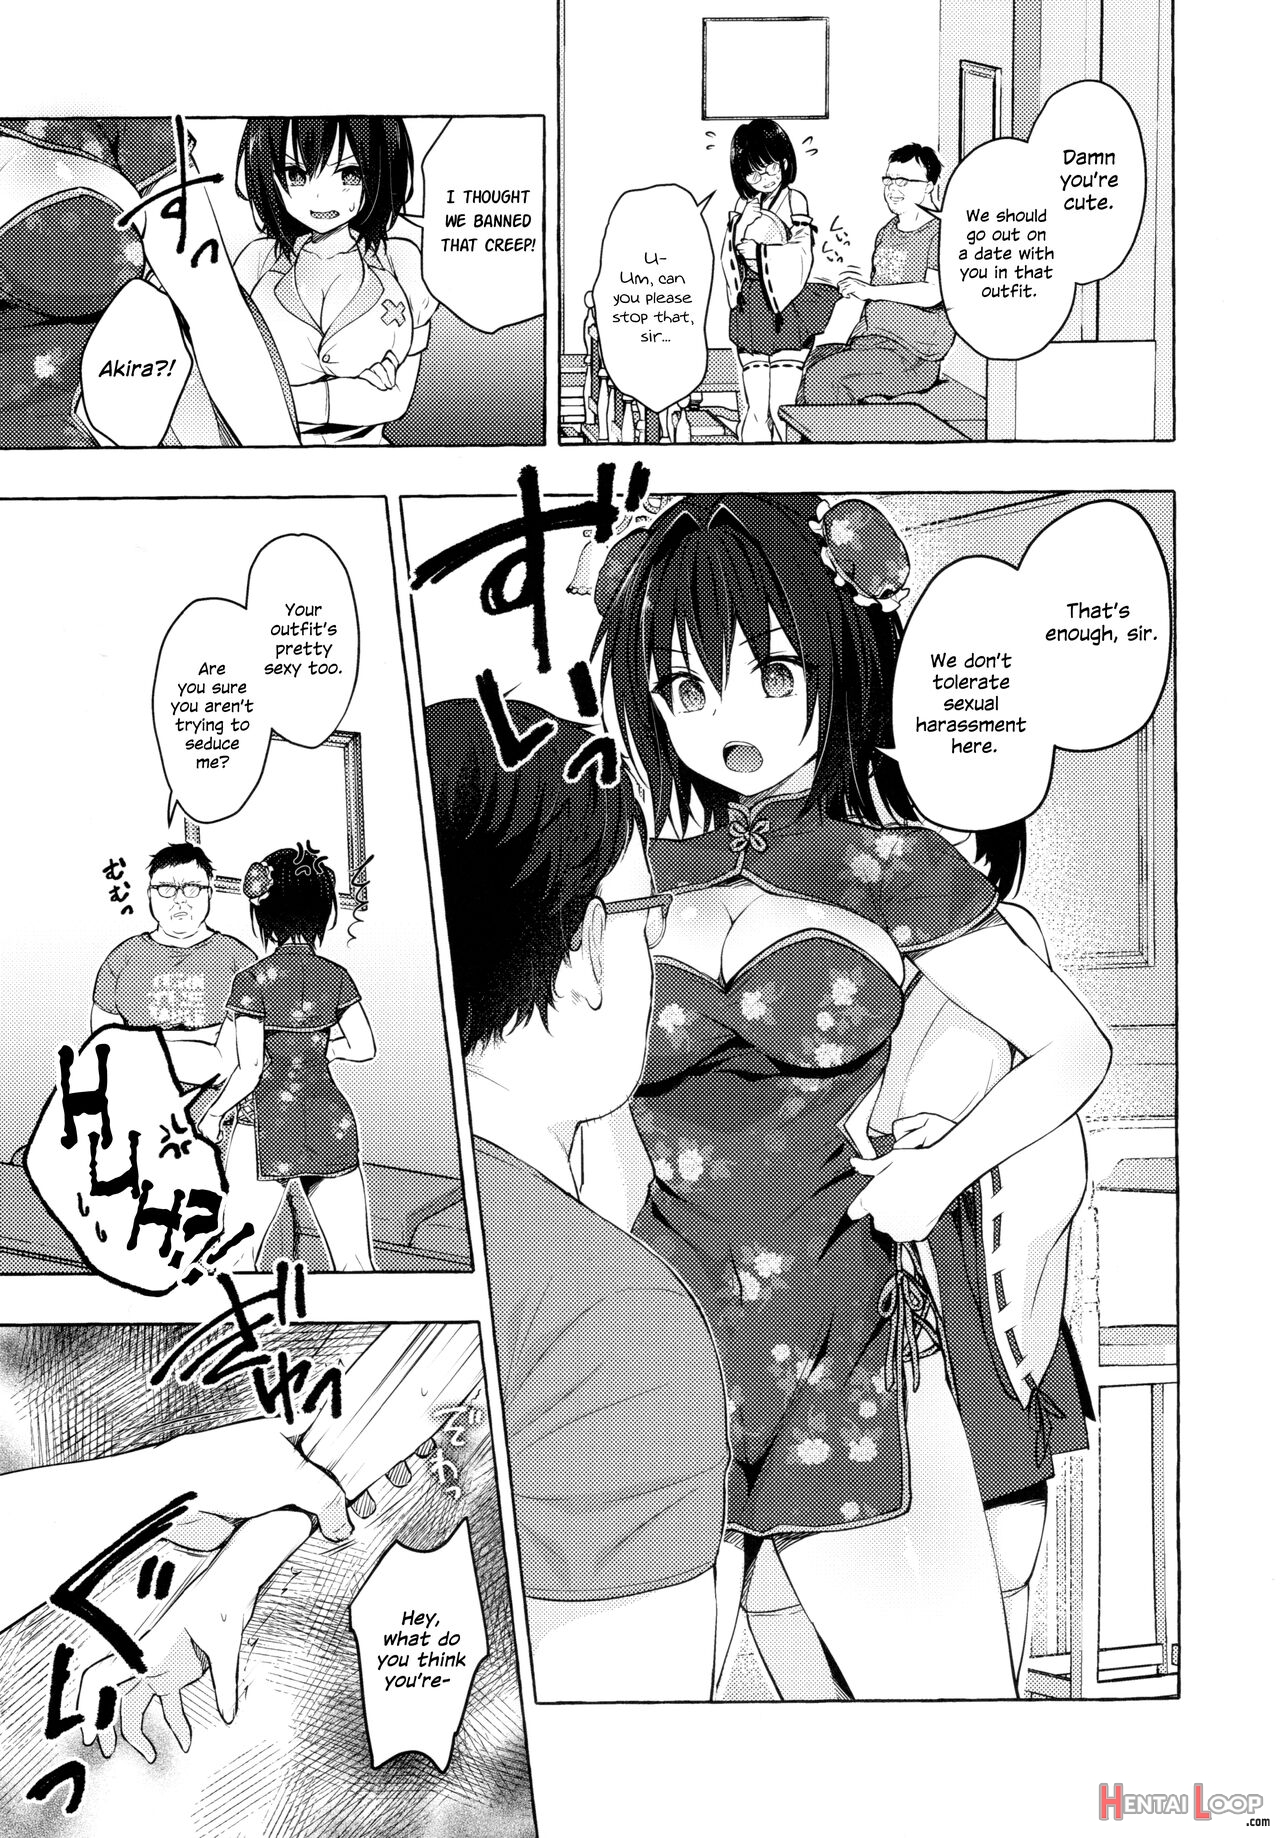 Akira-kun's Gender Swapped Sex Life 6 page 6